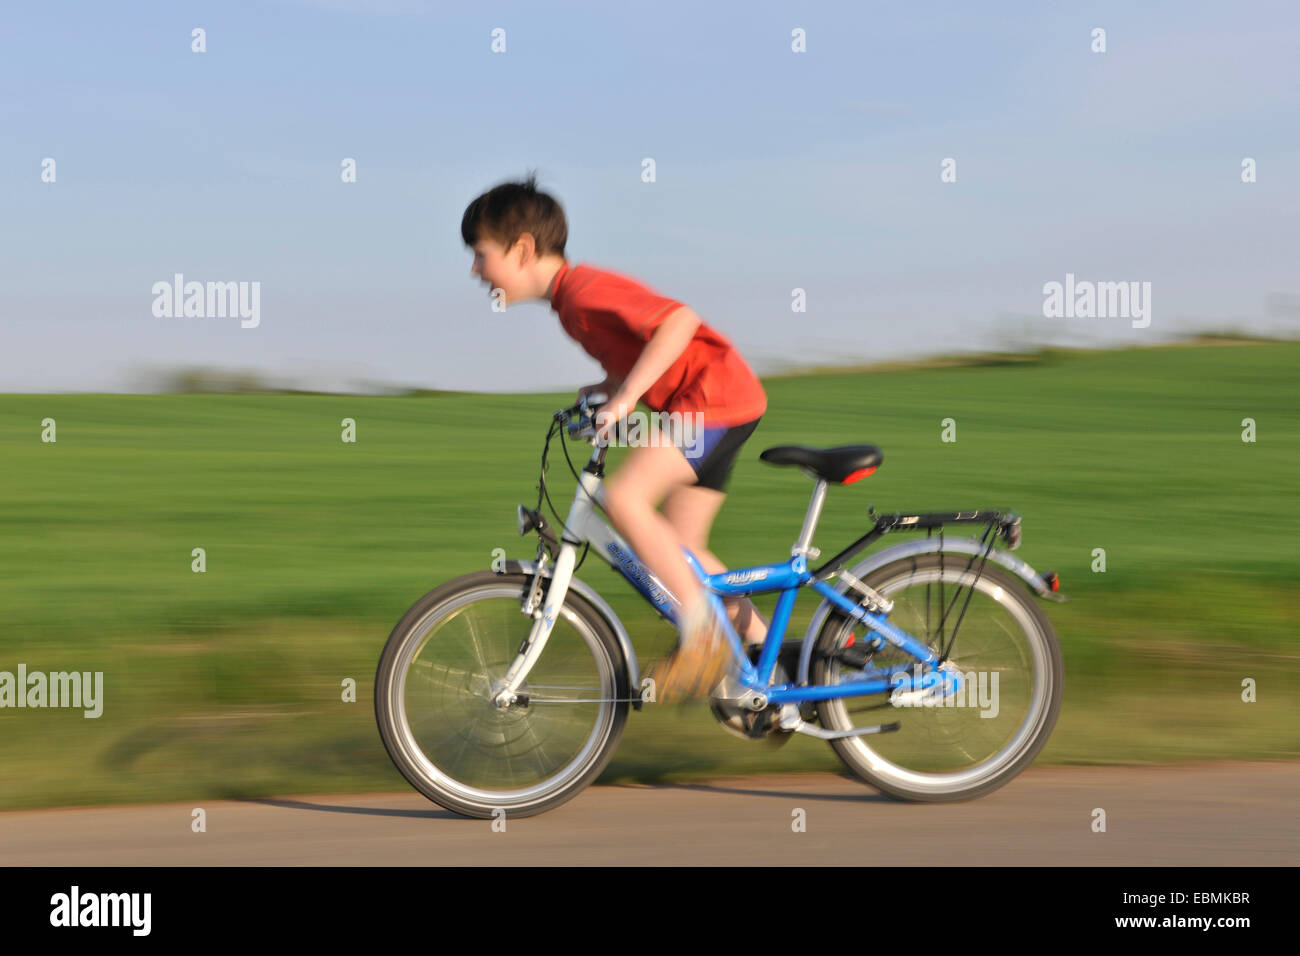 Boy riding a bicycle on a tarmaced track, Erfurt, Thuringia, Germany Stock Photo